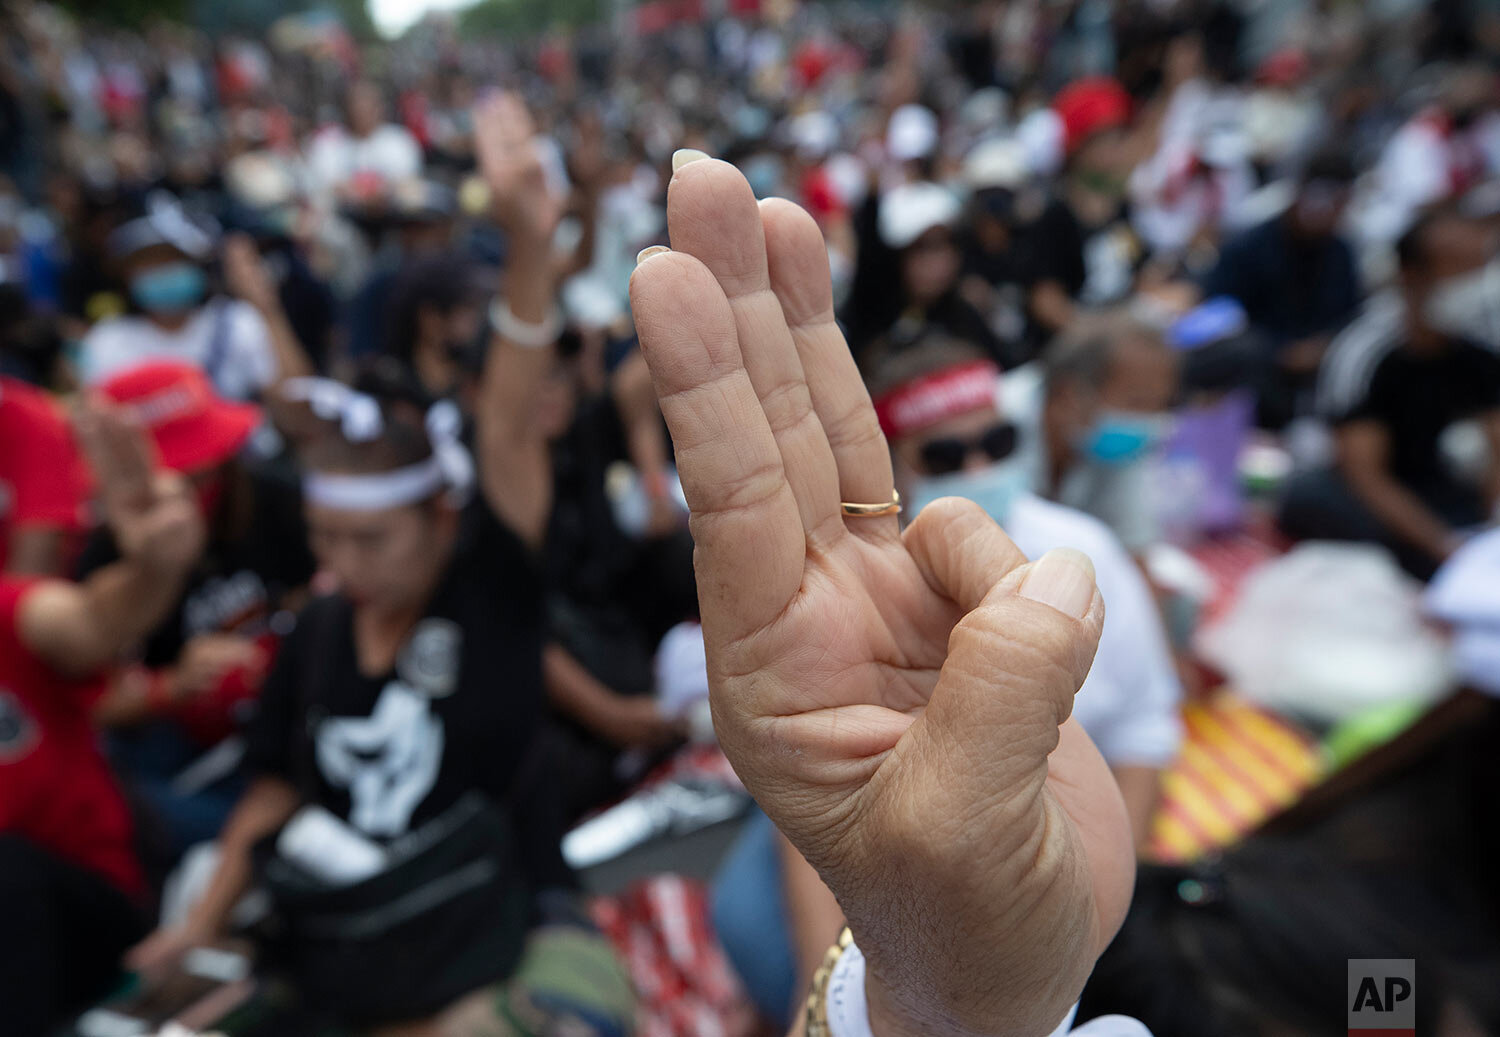  Pro-democracy demonstrators raise a three-finger salute, a symbol of resistance, during a protest outside the Parliament in Bangkok, Thailand, Thursday, Sept. 24, 2020. (AP Photo/Sakchai Lalit) 